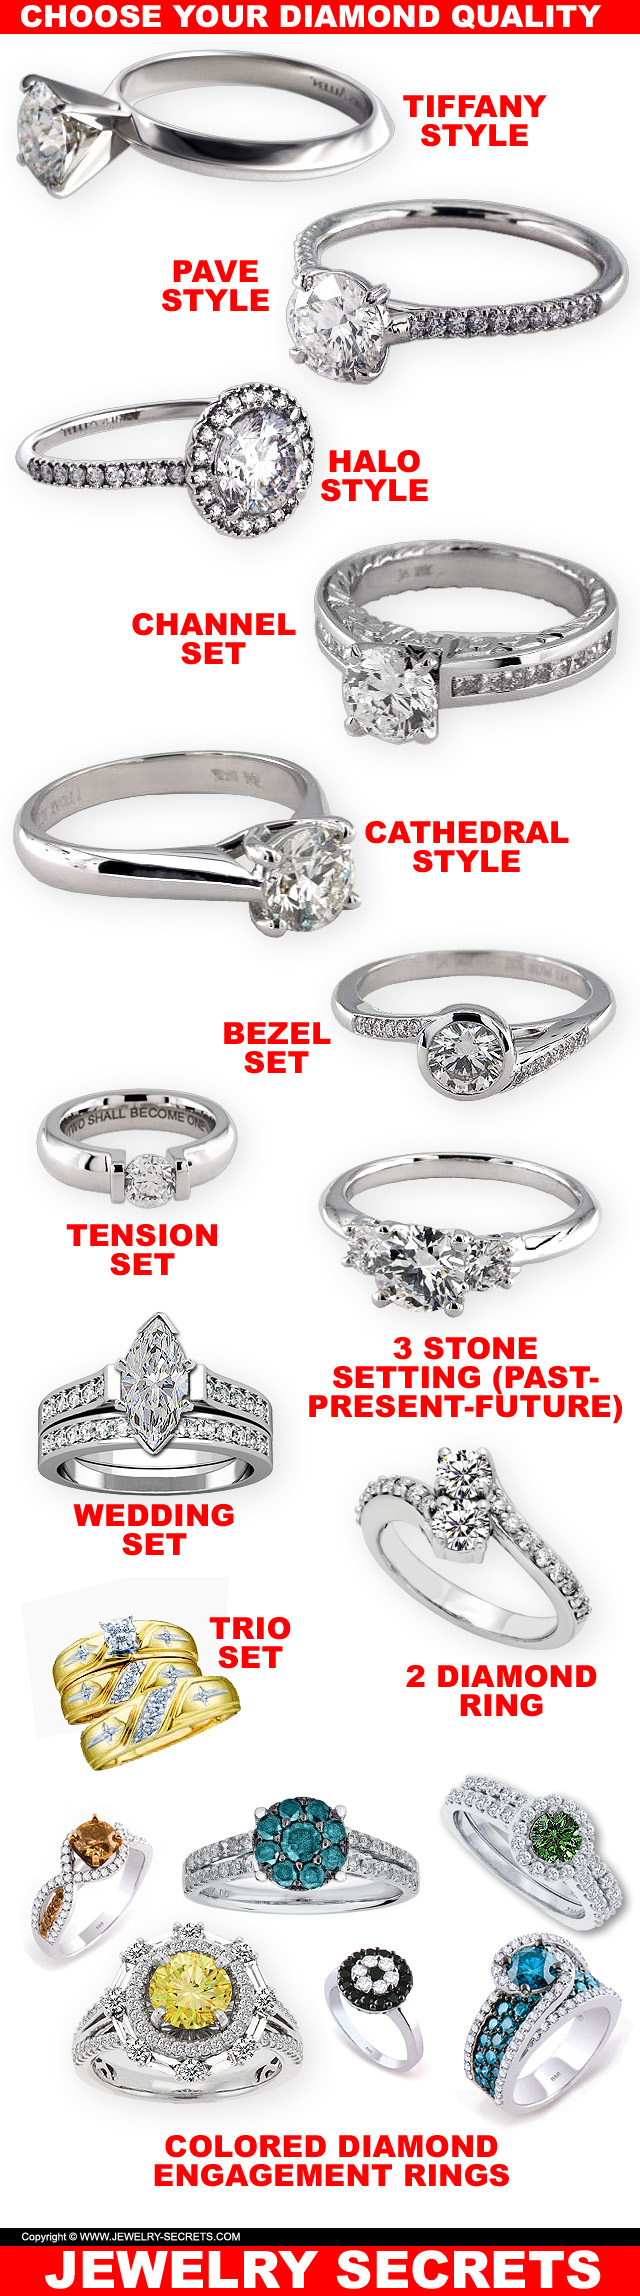 5 QUICK ENGAGEMENT RING TIPS – Jewelry 